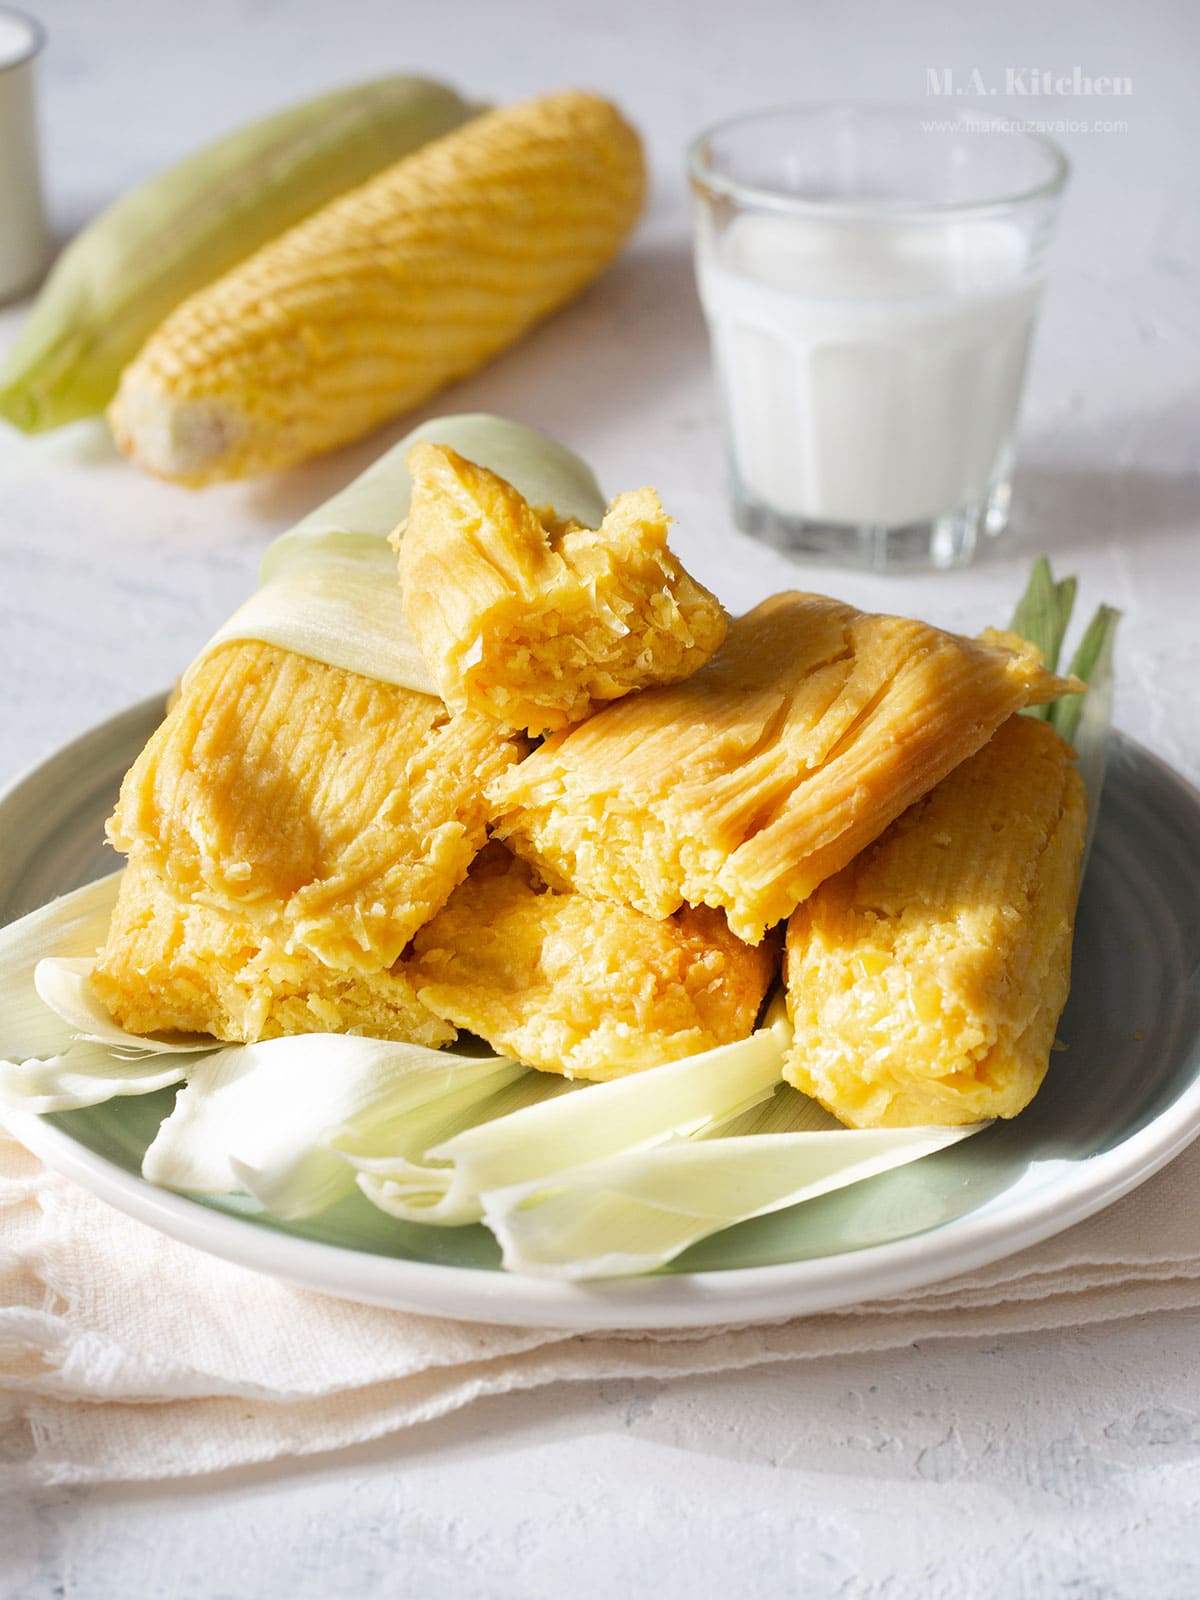 Tamales de elote unwrapped and placed on a place with a glass of milk and fresh corn ears on the background.